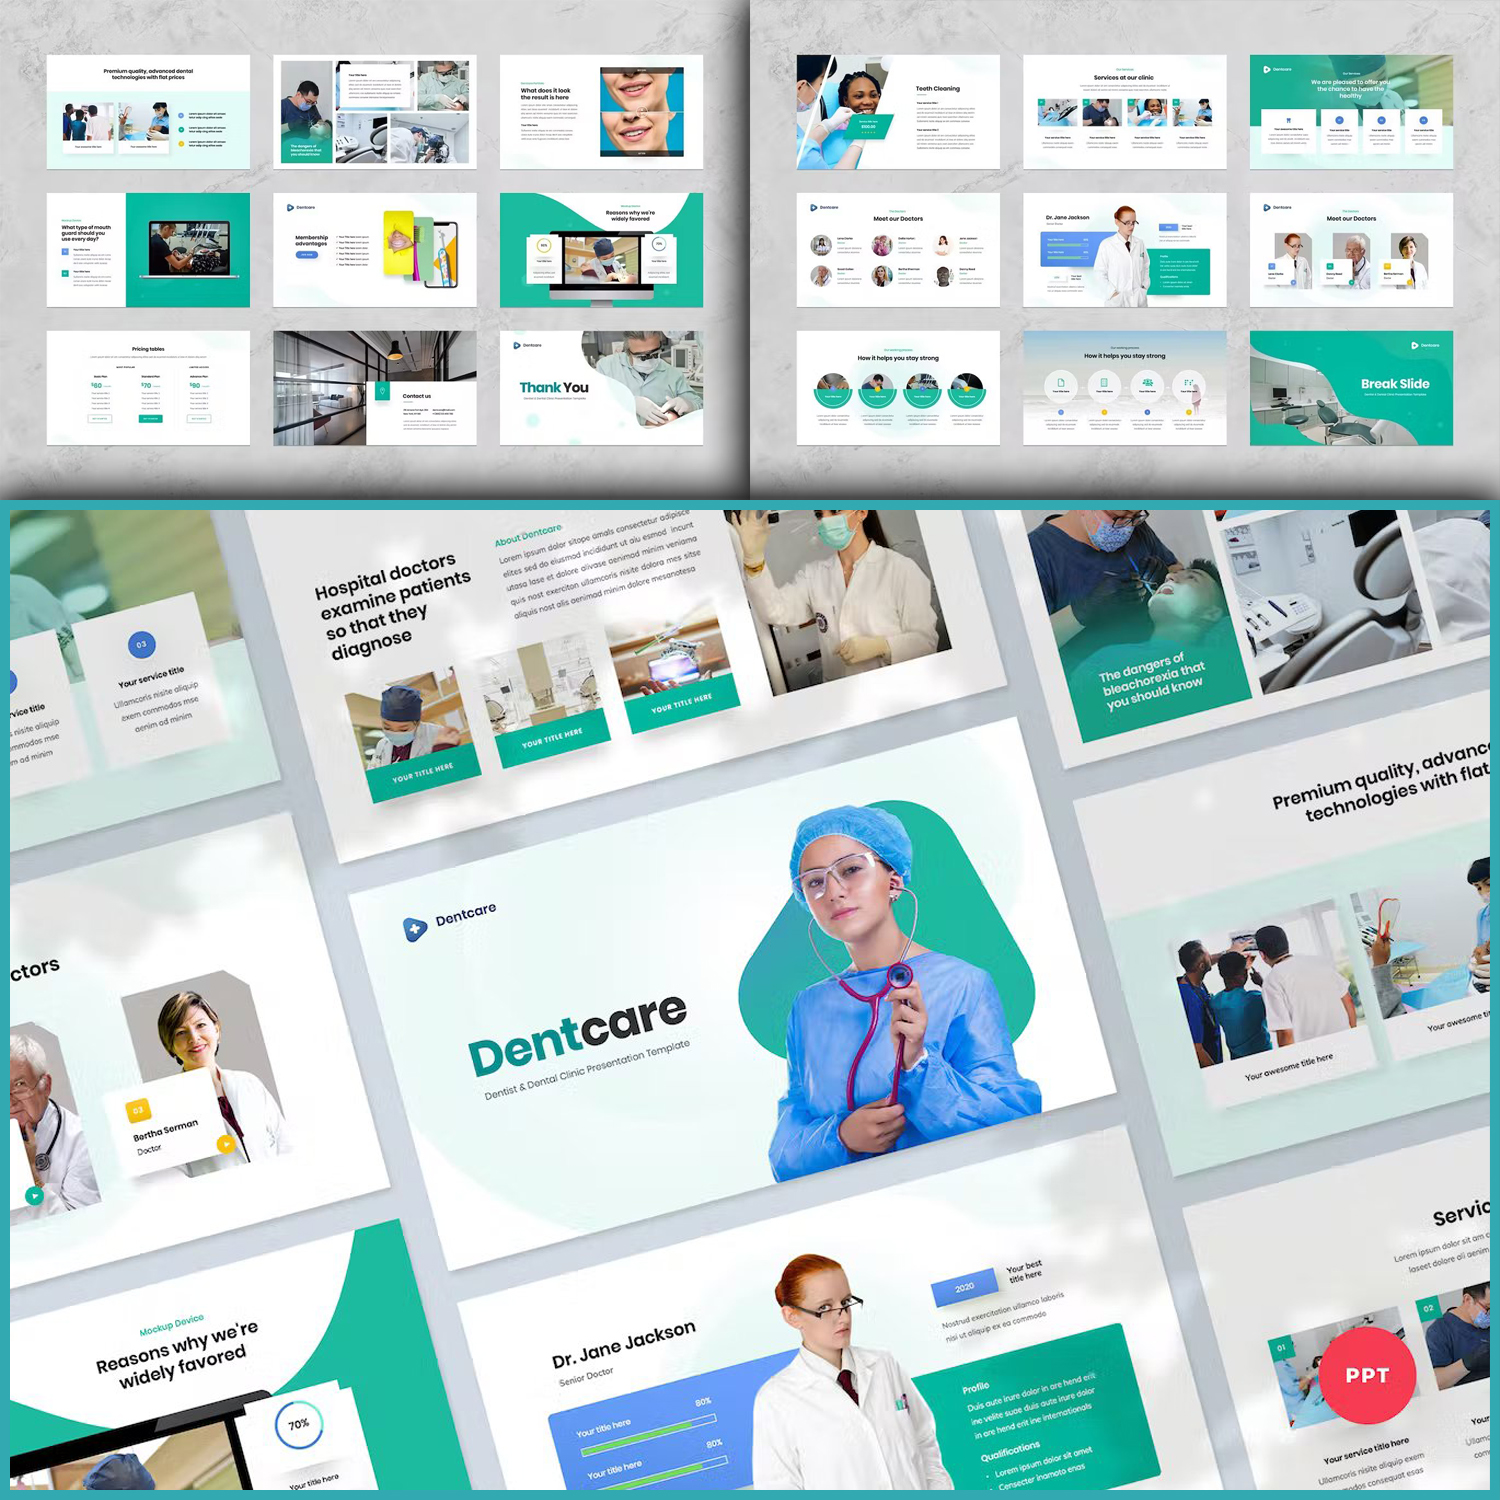 A collection of images of amazing presentation template slides on the theme of dentists.